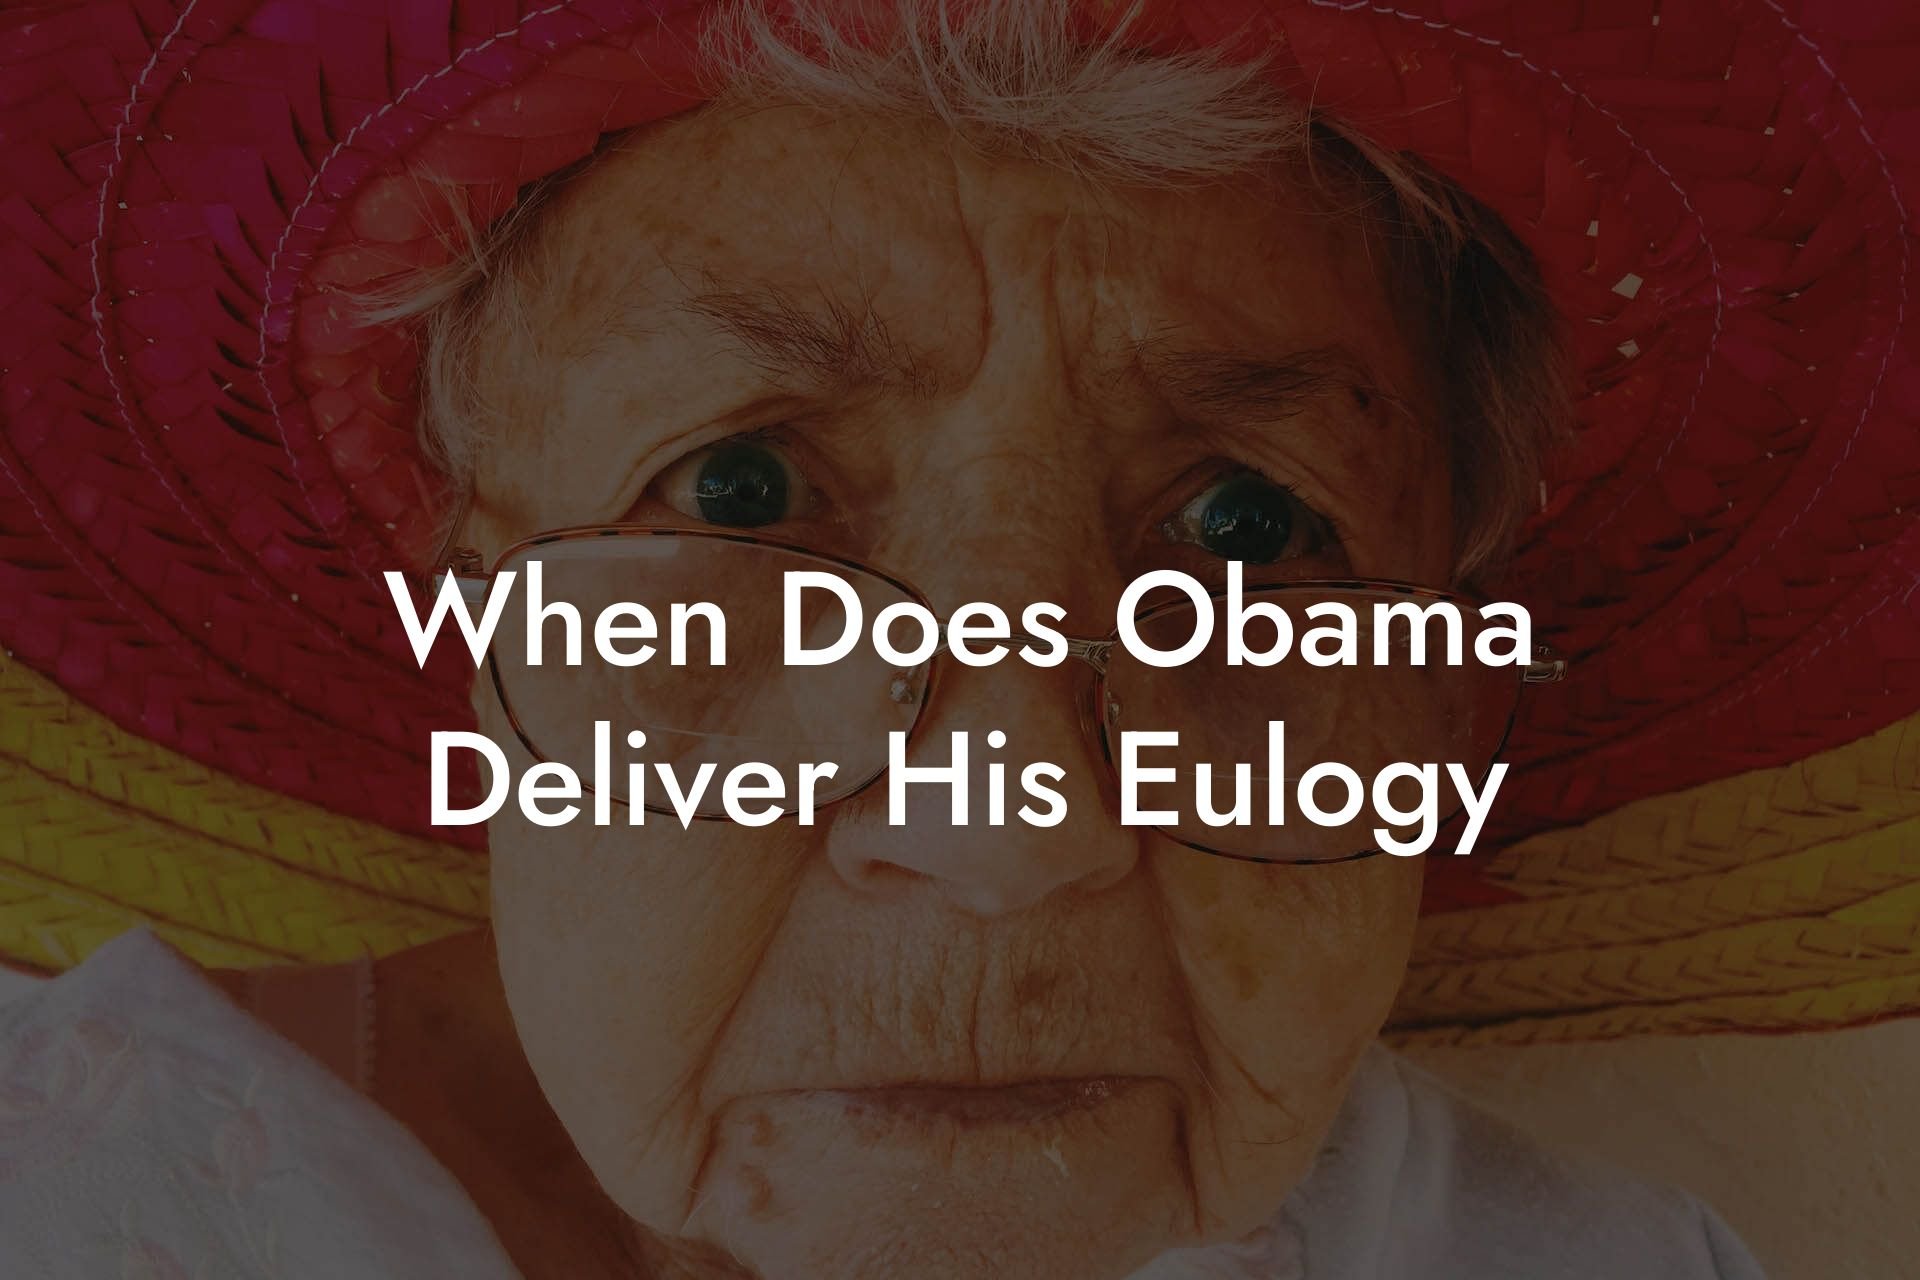 When Does Obama Deliver His Eulogy